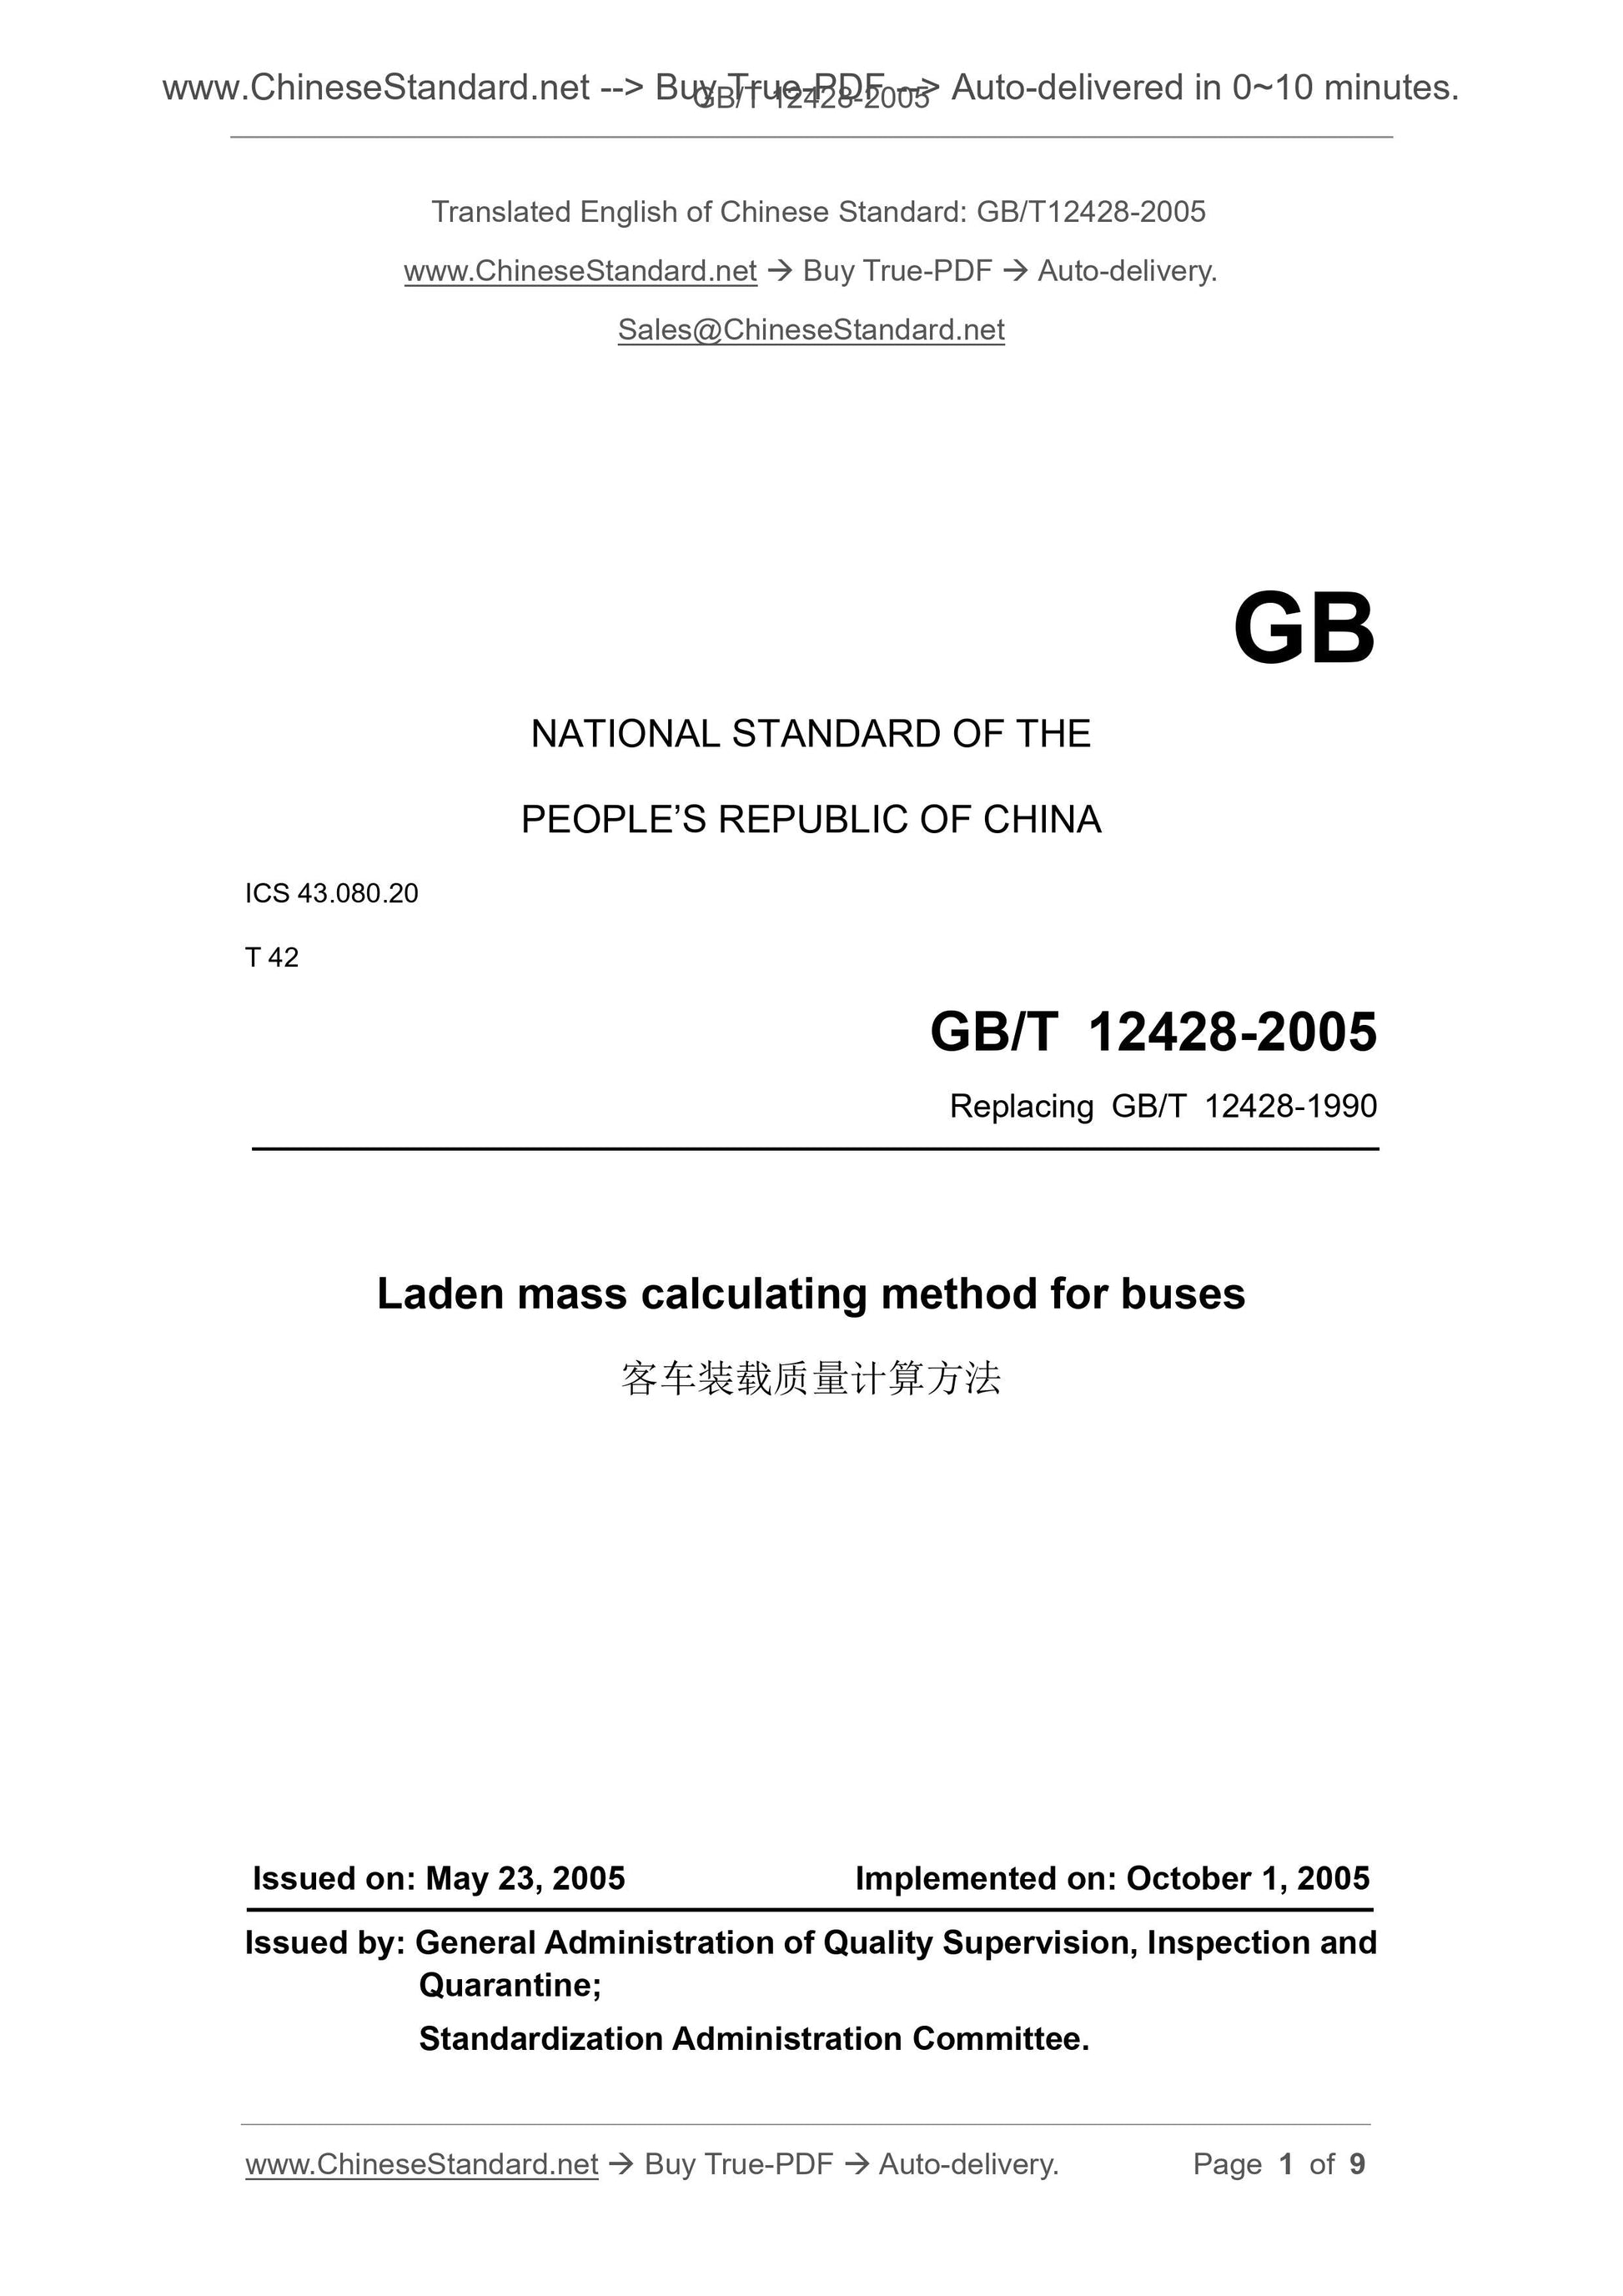 GB/T 12428-2005 Page 1